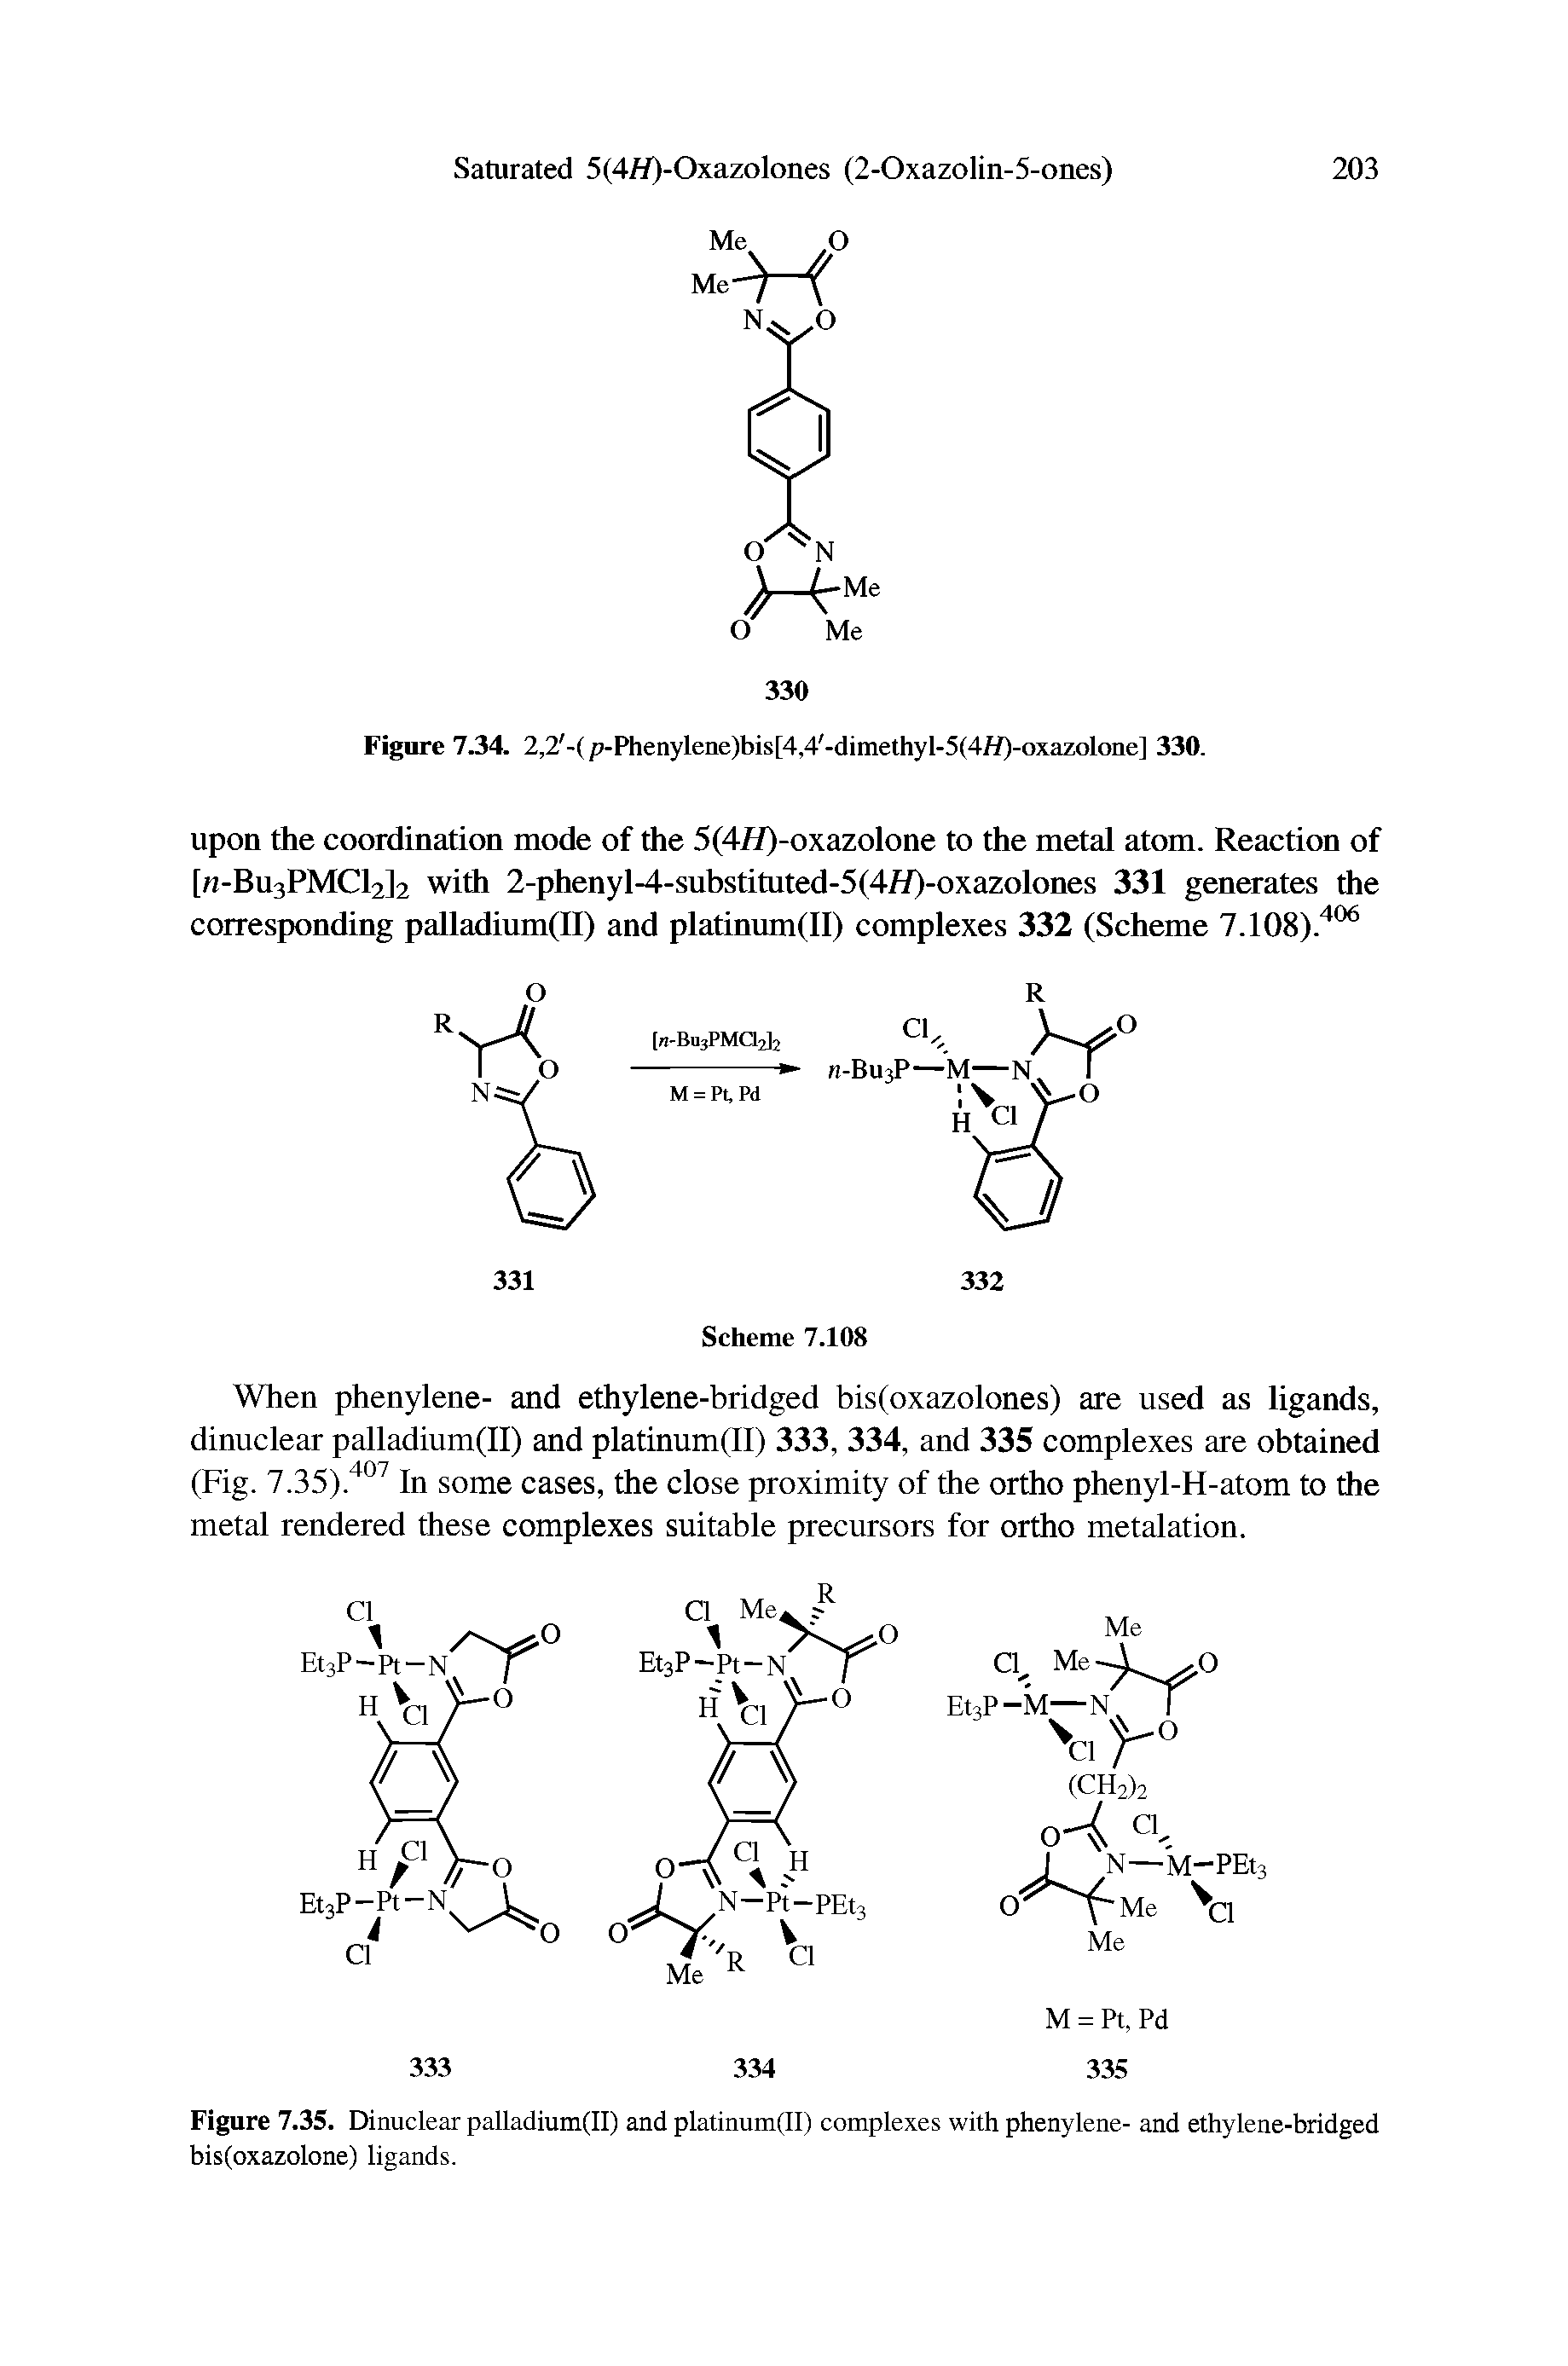 Figure 7.35. Dinuclear palladium(II) and platinum(ll) complexes with phenylene- and ethylene-bridged bis(oxazolone) ligands.